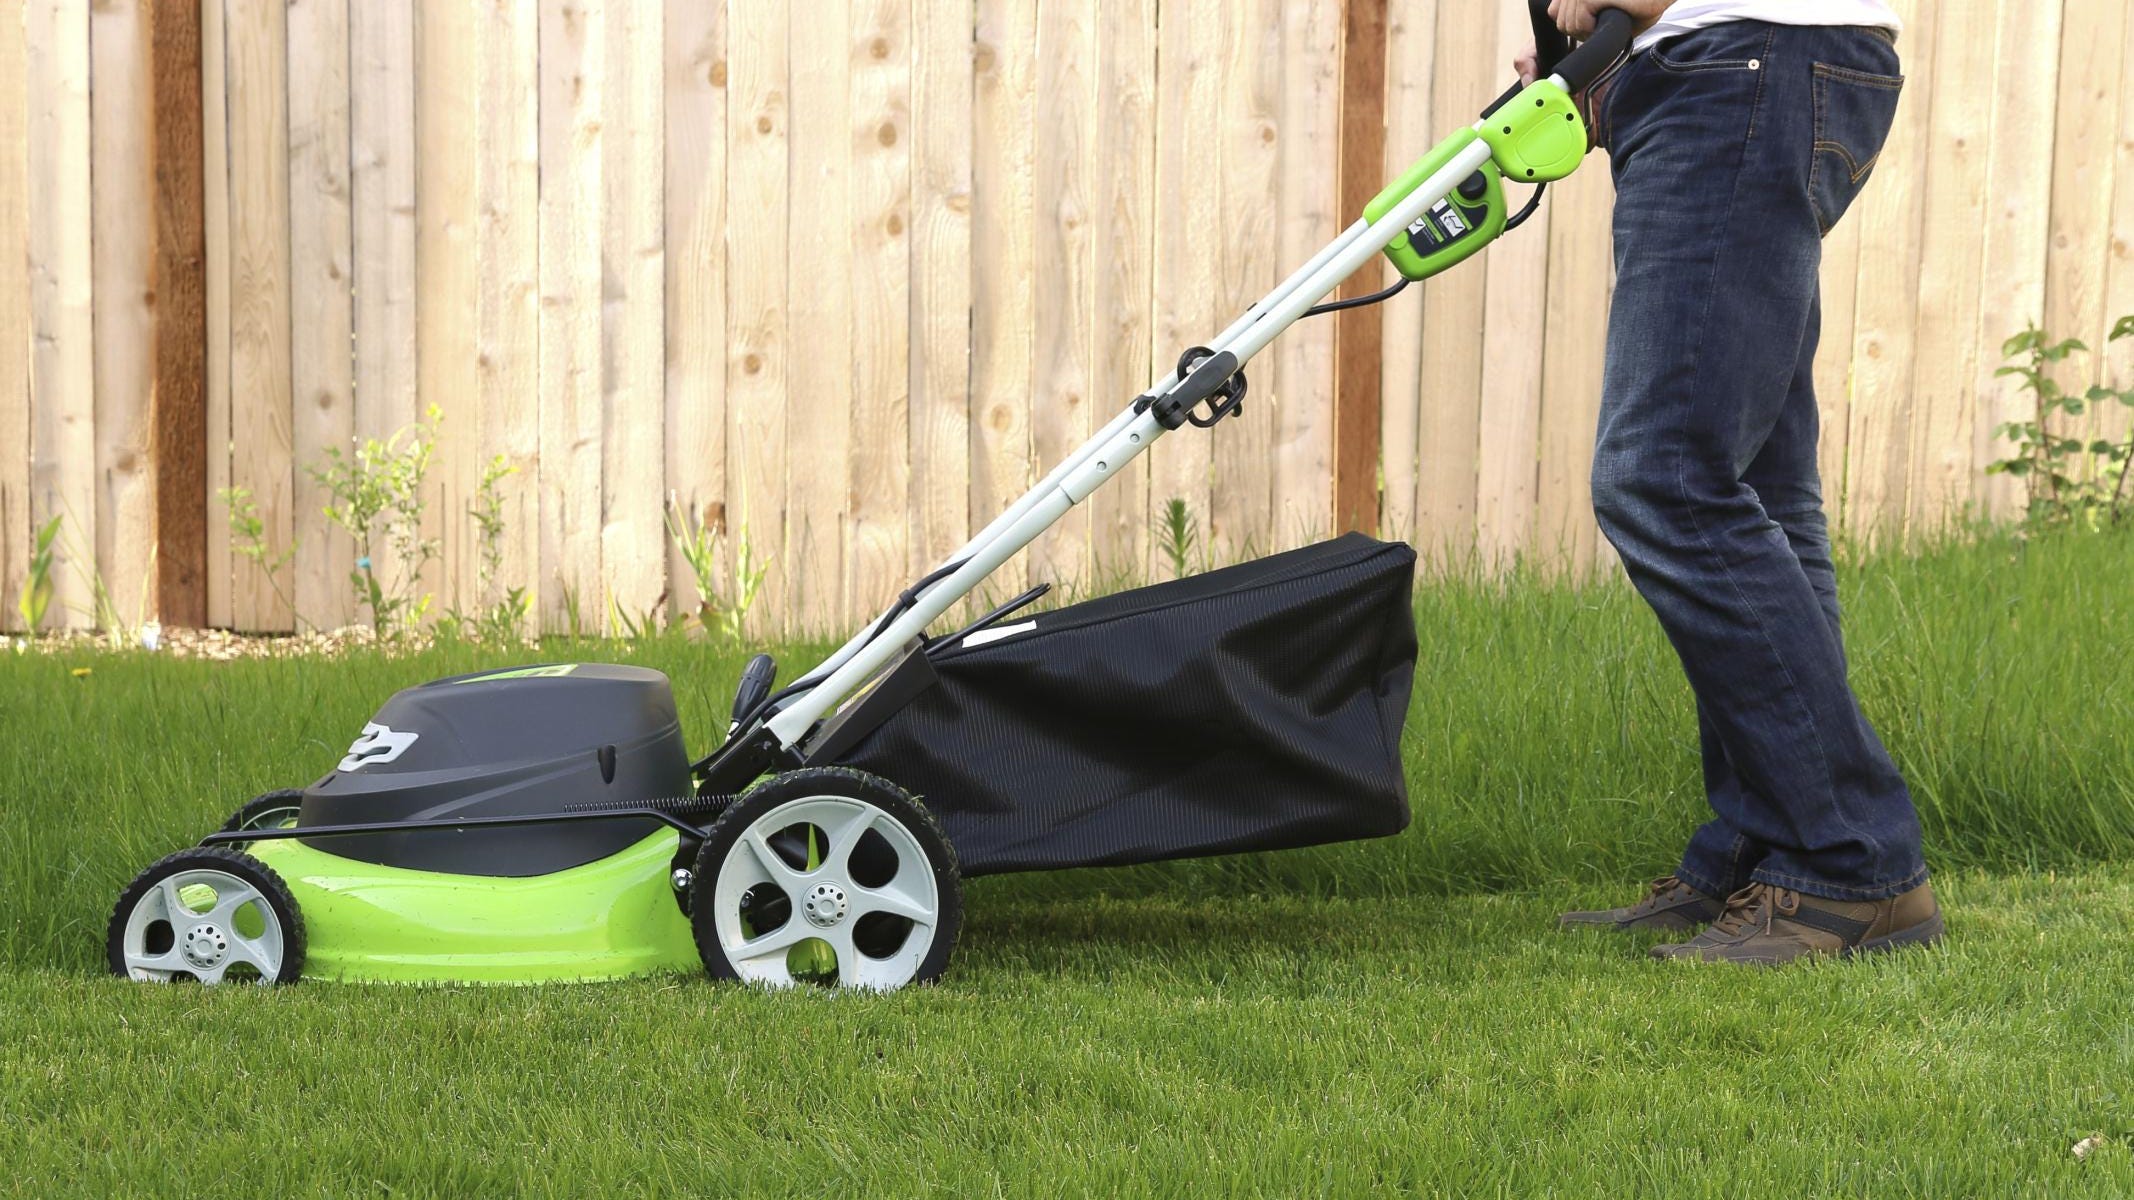 louisville-offers-rebates-for-electric-lawn-care-equipment